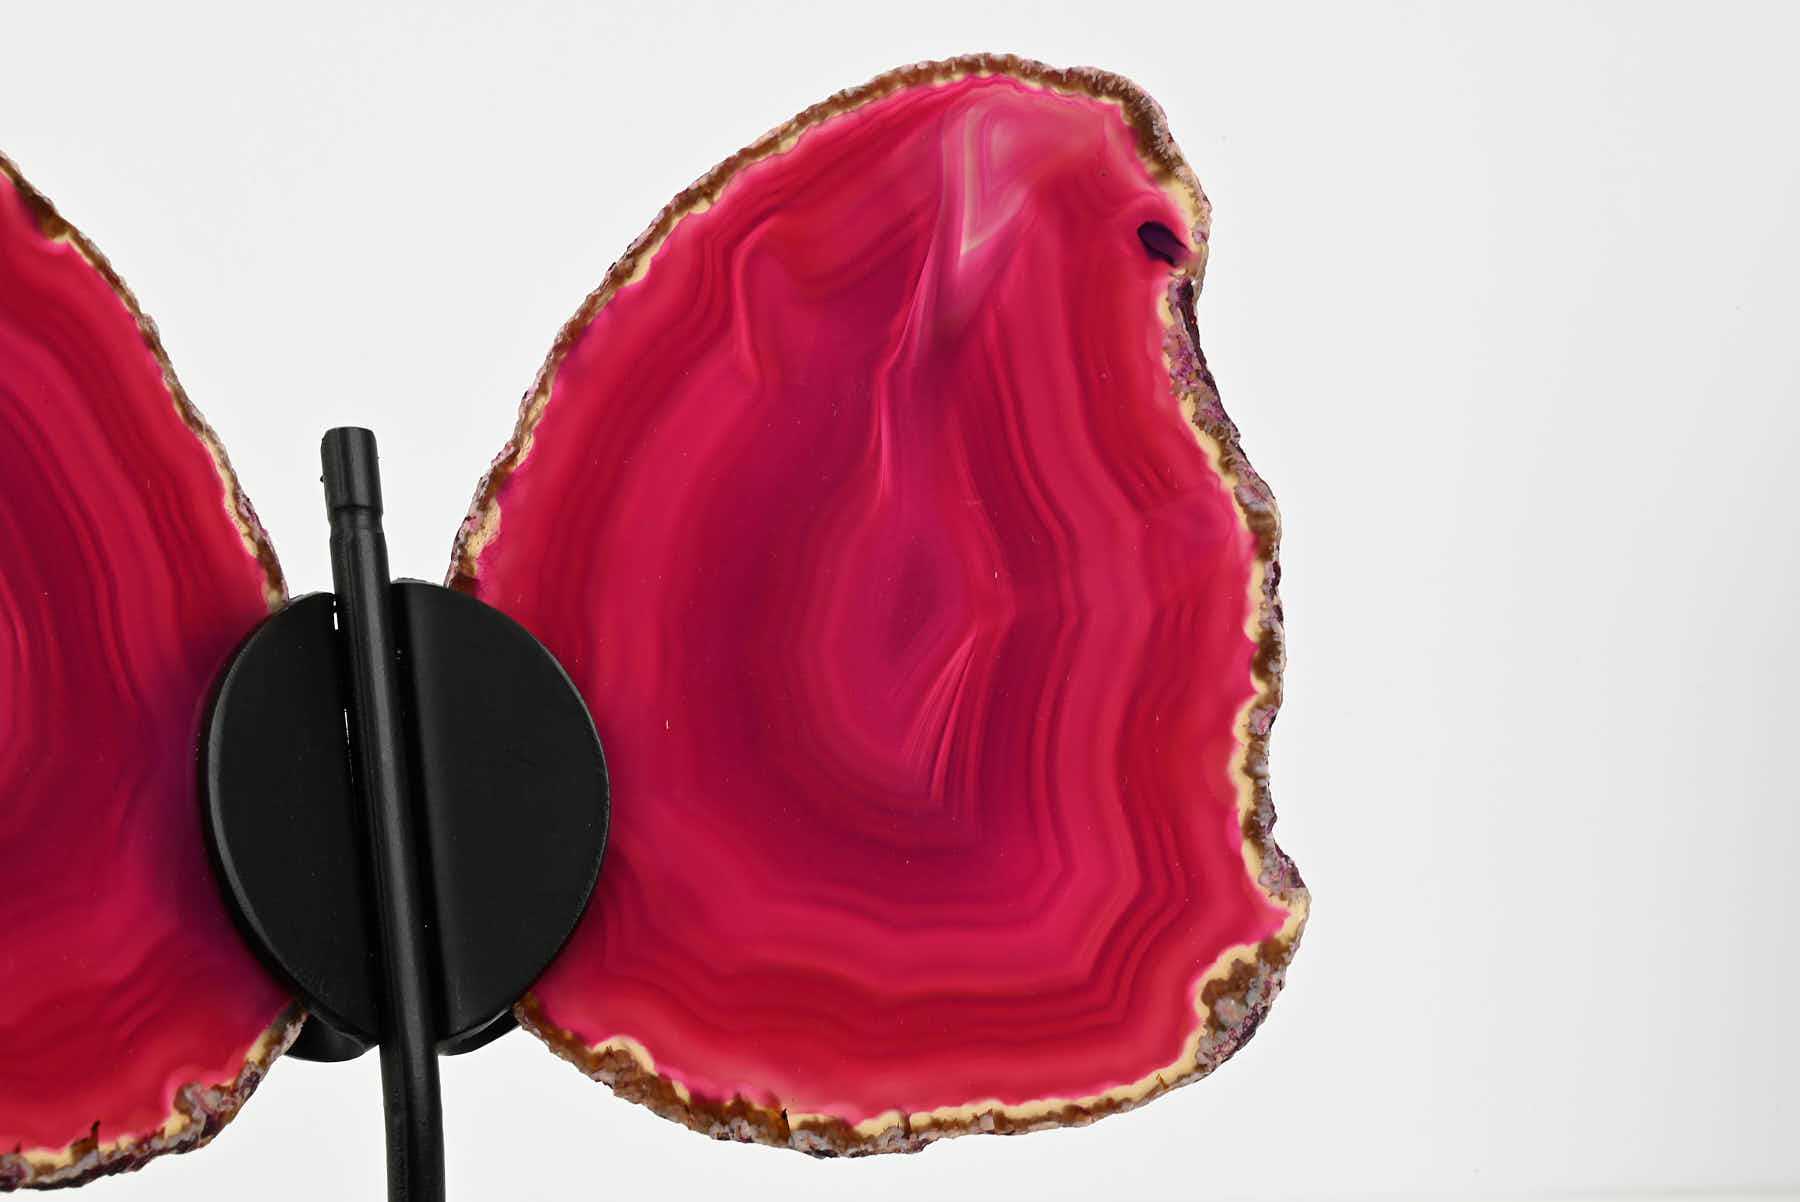 Pink Agate Butterfly on Stand - 0.50kg and 20cm Tall - #BUPINK-10013